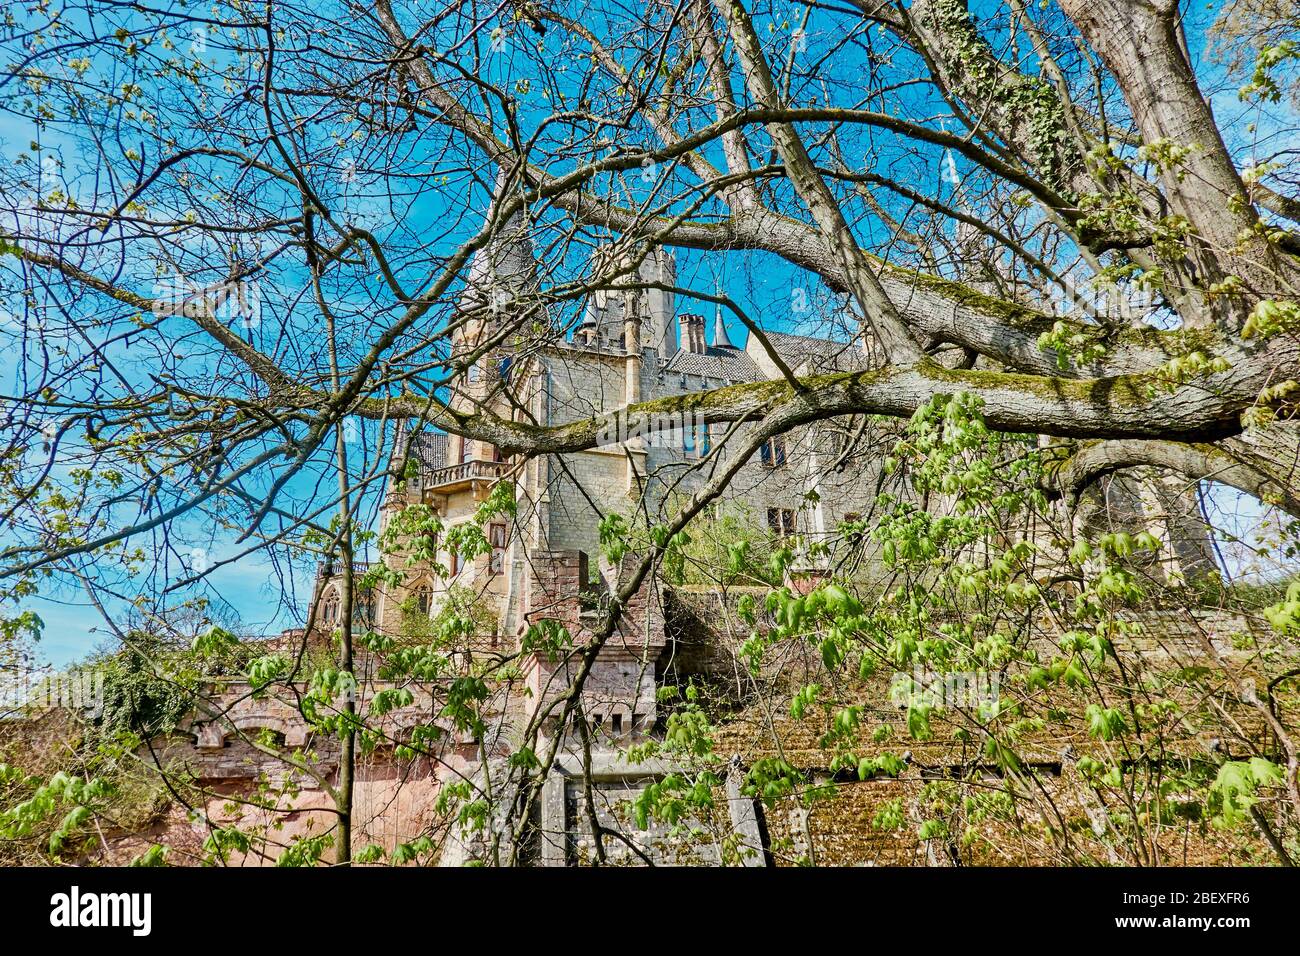 Nordstemmen, Germany, April 15, 2020: Marienburg Castle behind branches with fresh young green leaves Stock Photo